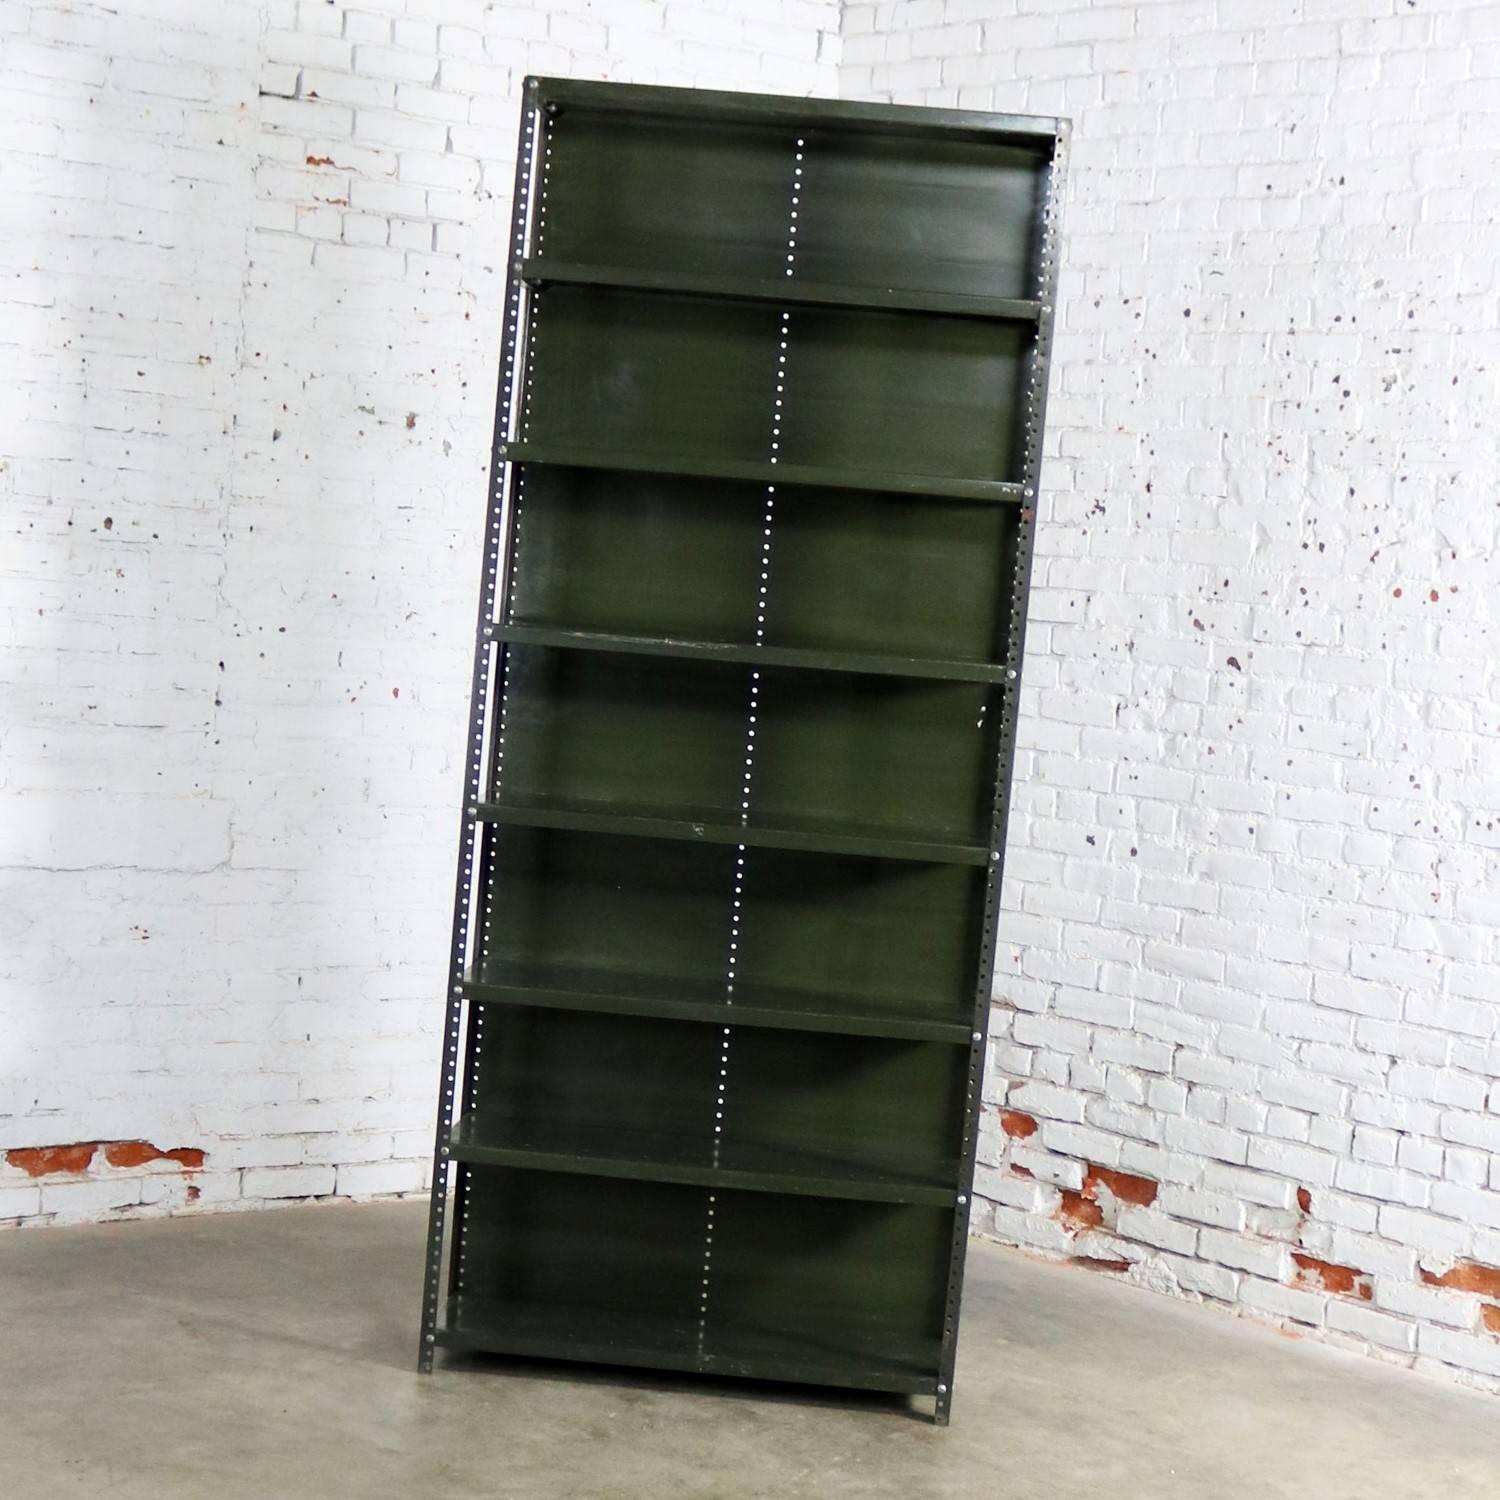 Wonderful Industrial steel bookcase or shelving unit. It retains its original Army green paint but with awesome age patina. It is in solid sturdy condition but has age and use dings, dents, scratches, and bare spots that creates a fabulous age